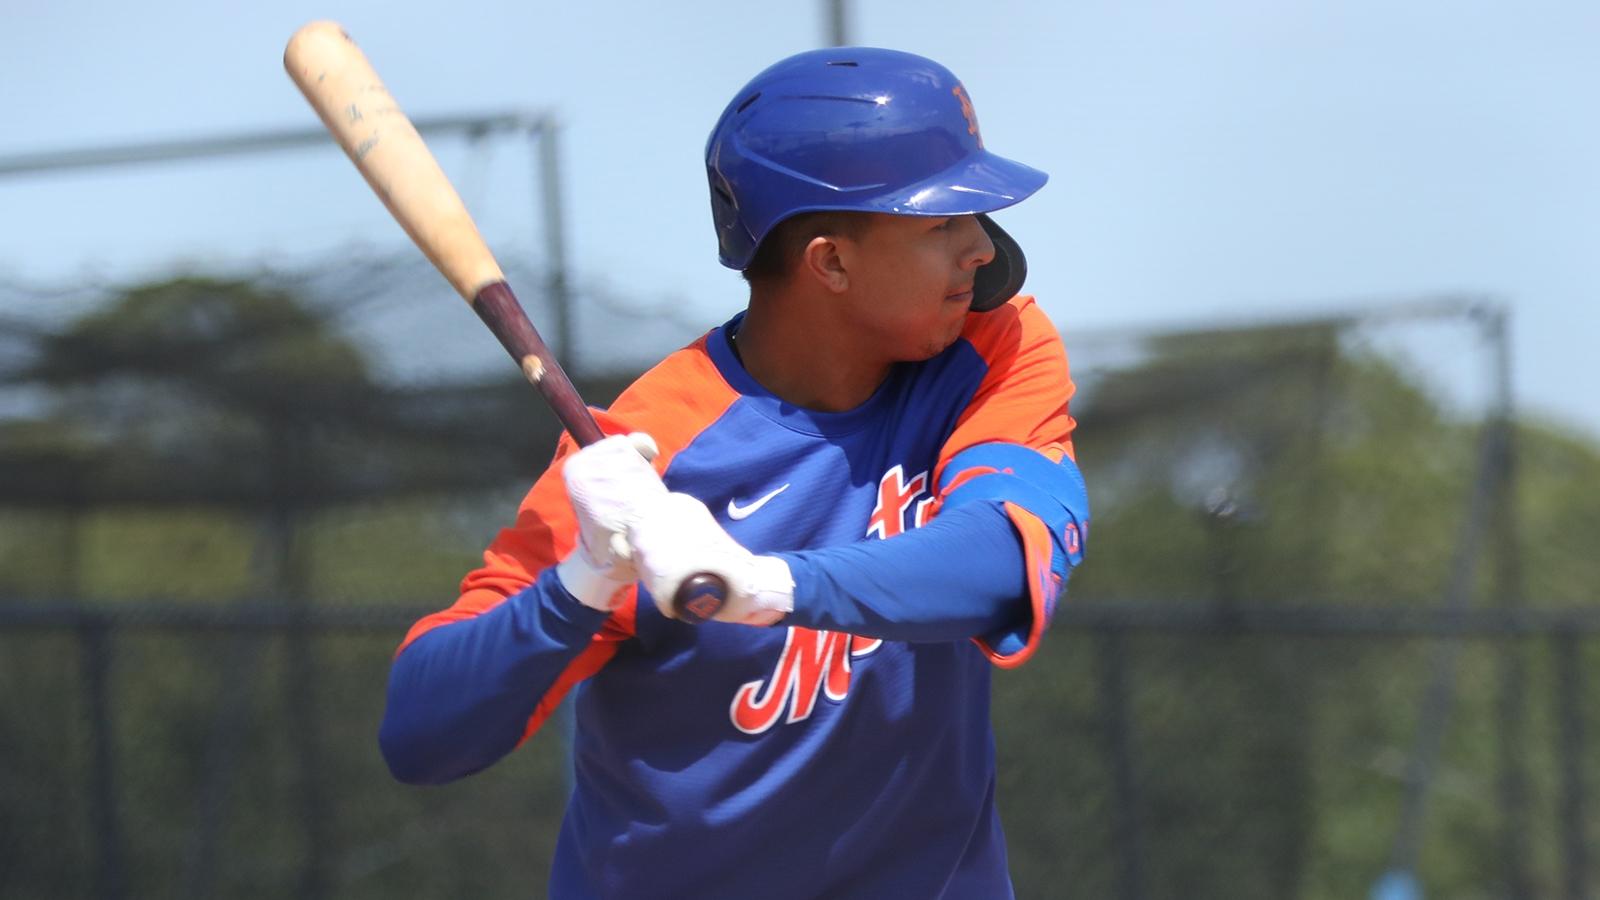 Mets prospect Mark Vientos swinging at 2021 spring training in Port St. Lucie, Fla. / Rob Carbuccia/SNY